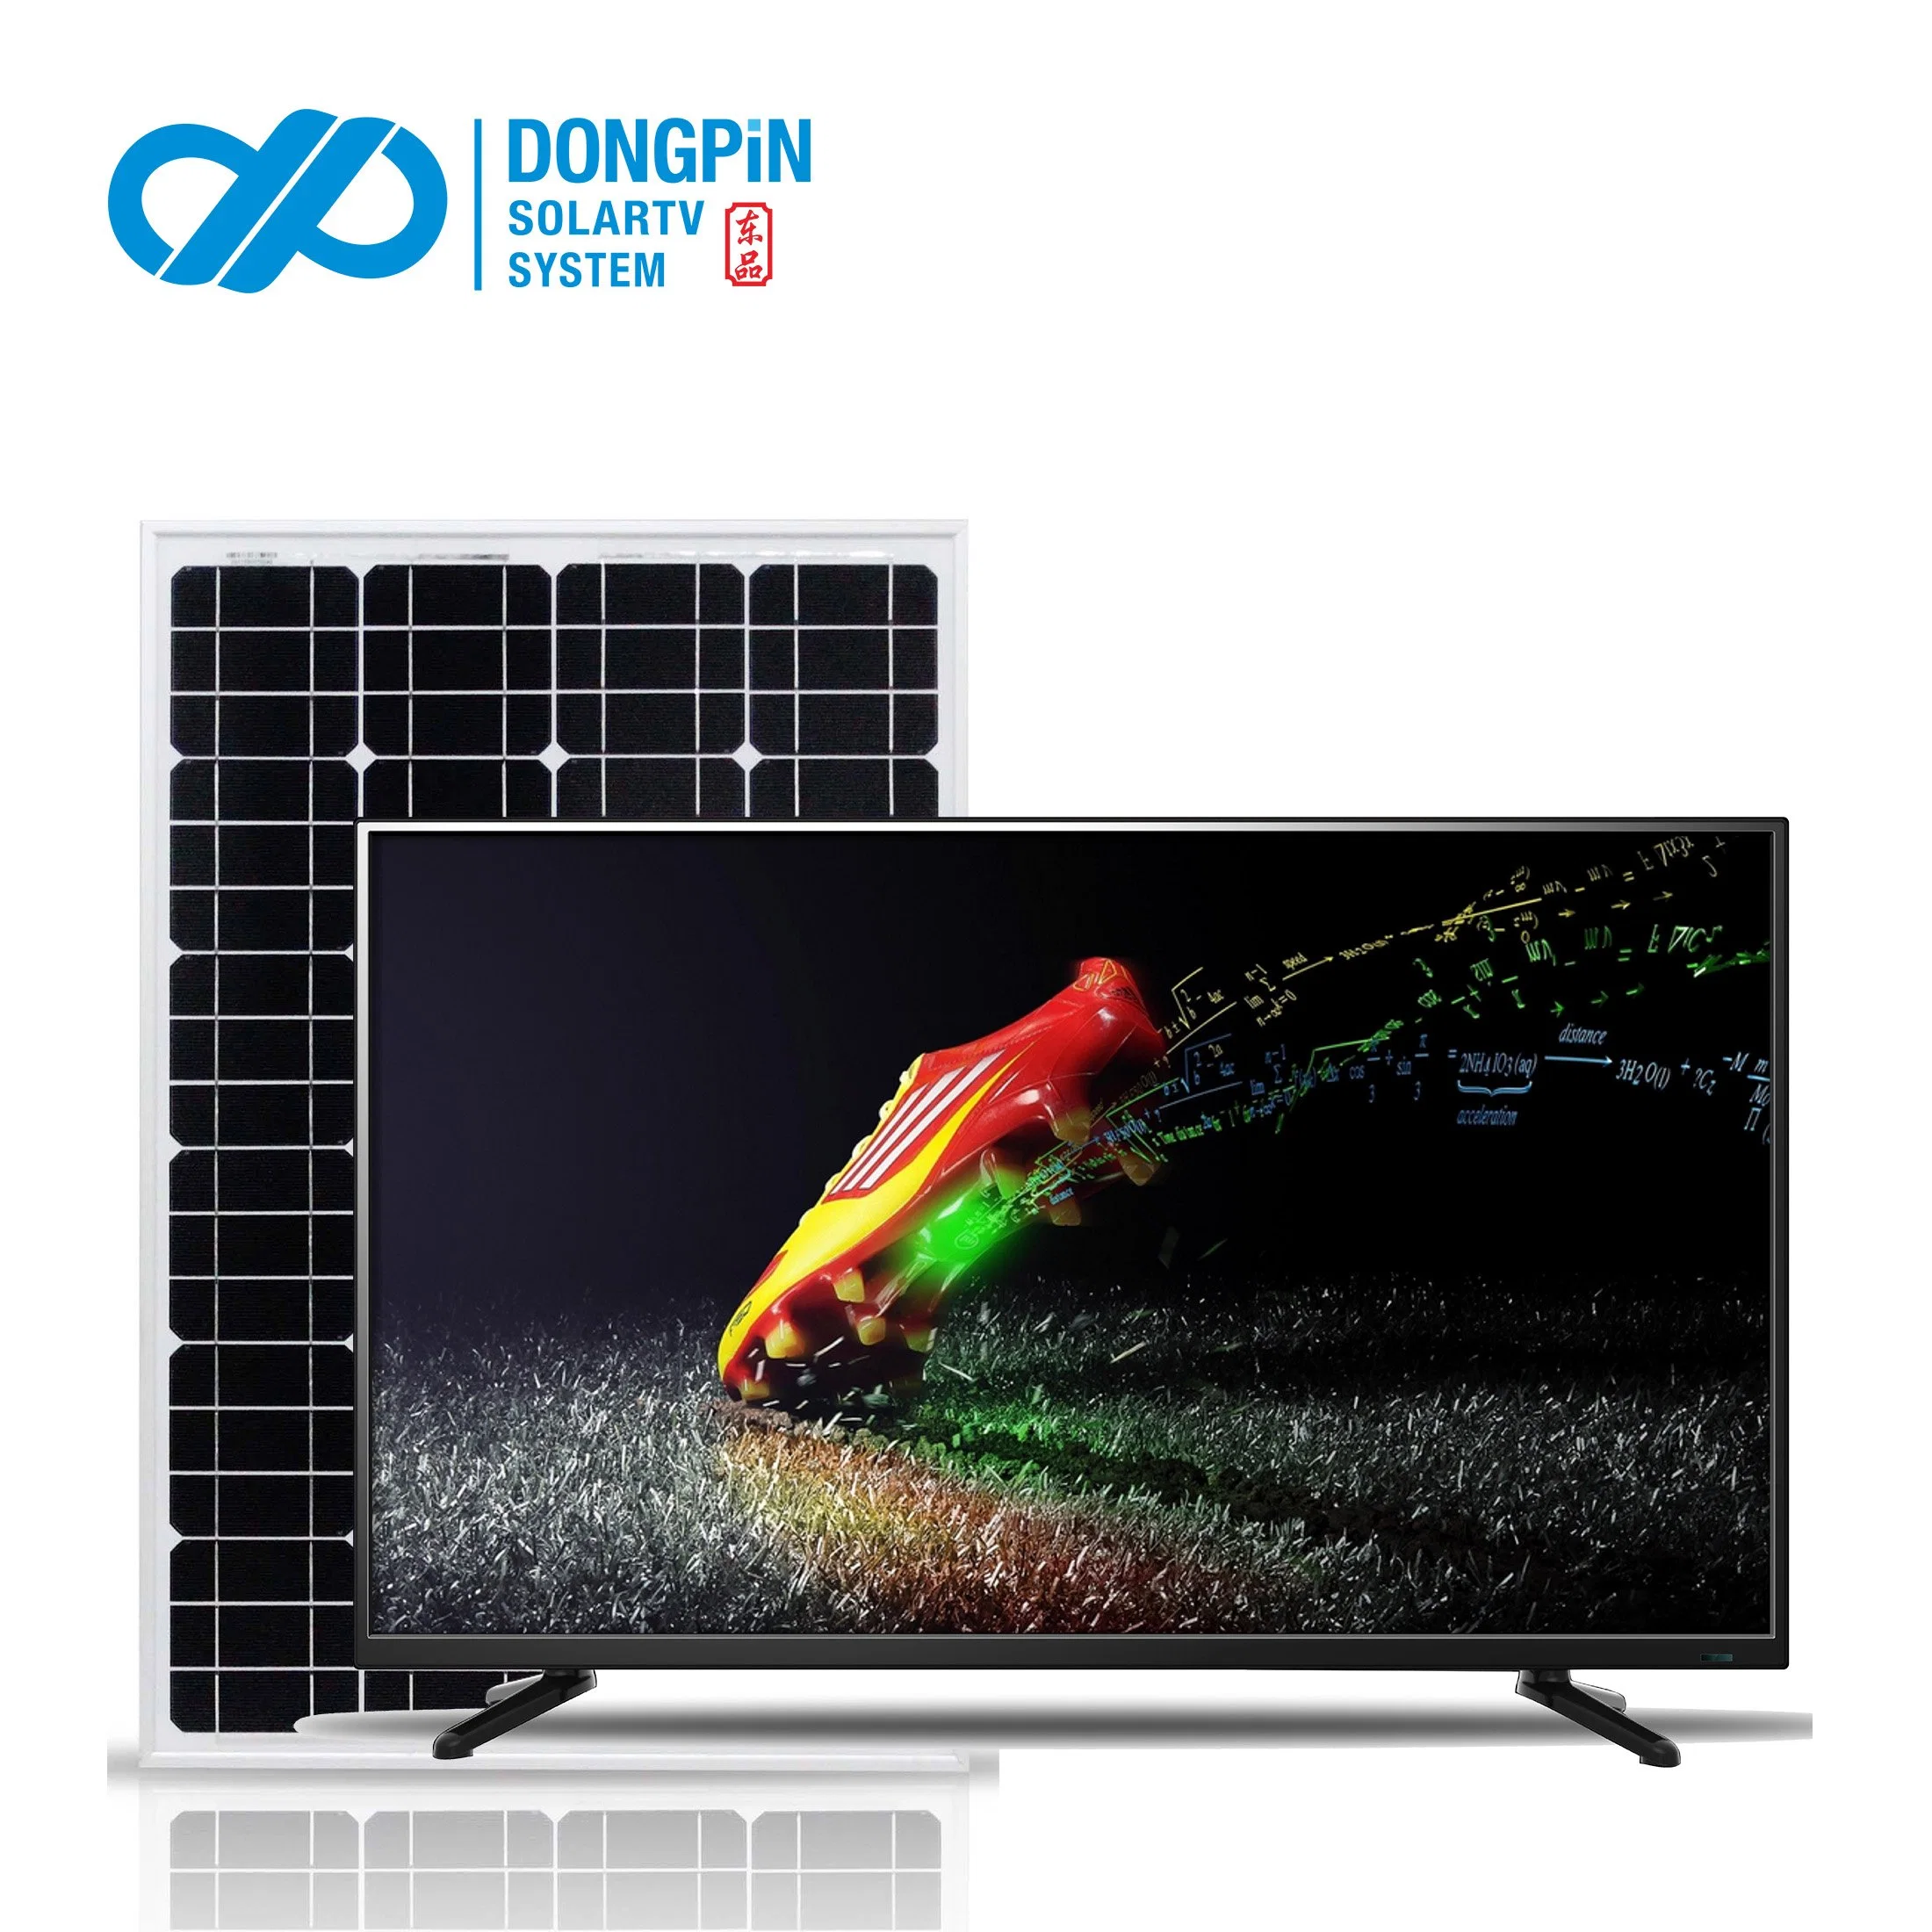 TV Factory Cheap Price Solar LED TV Rechargeable Solar TV 19 22 24 32 43inch for Solar Powered LCD TV Solar Lighting Energy System Home